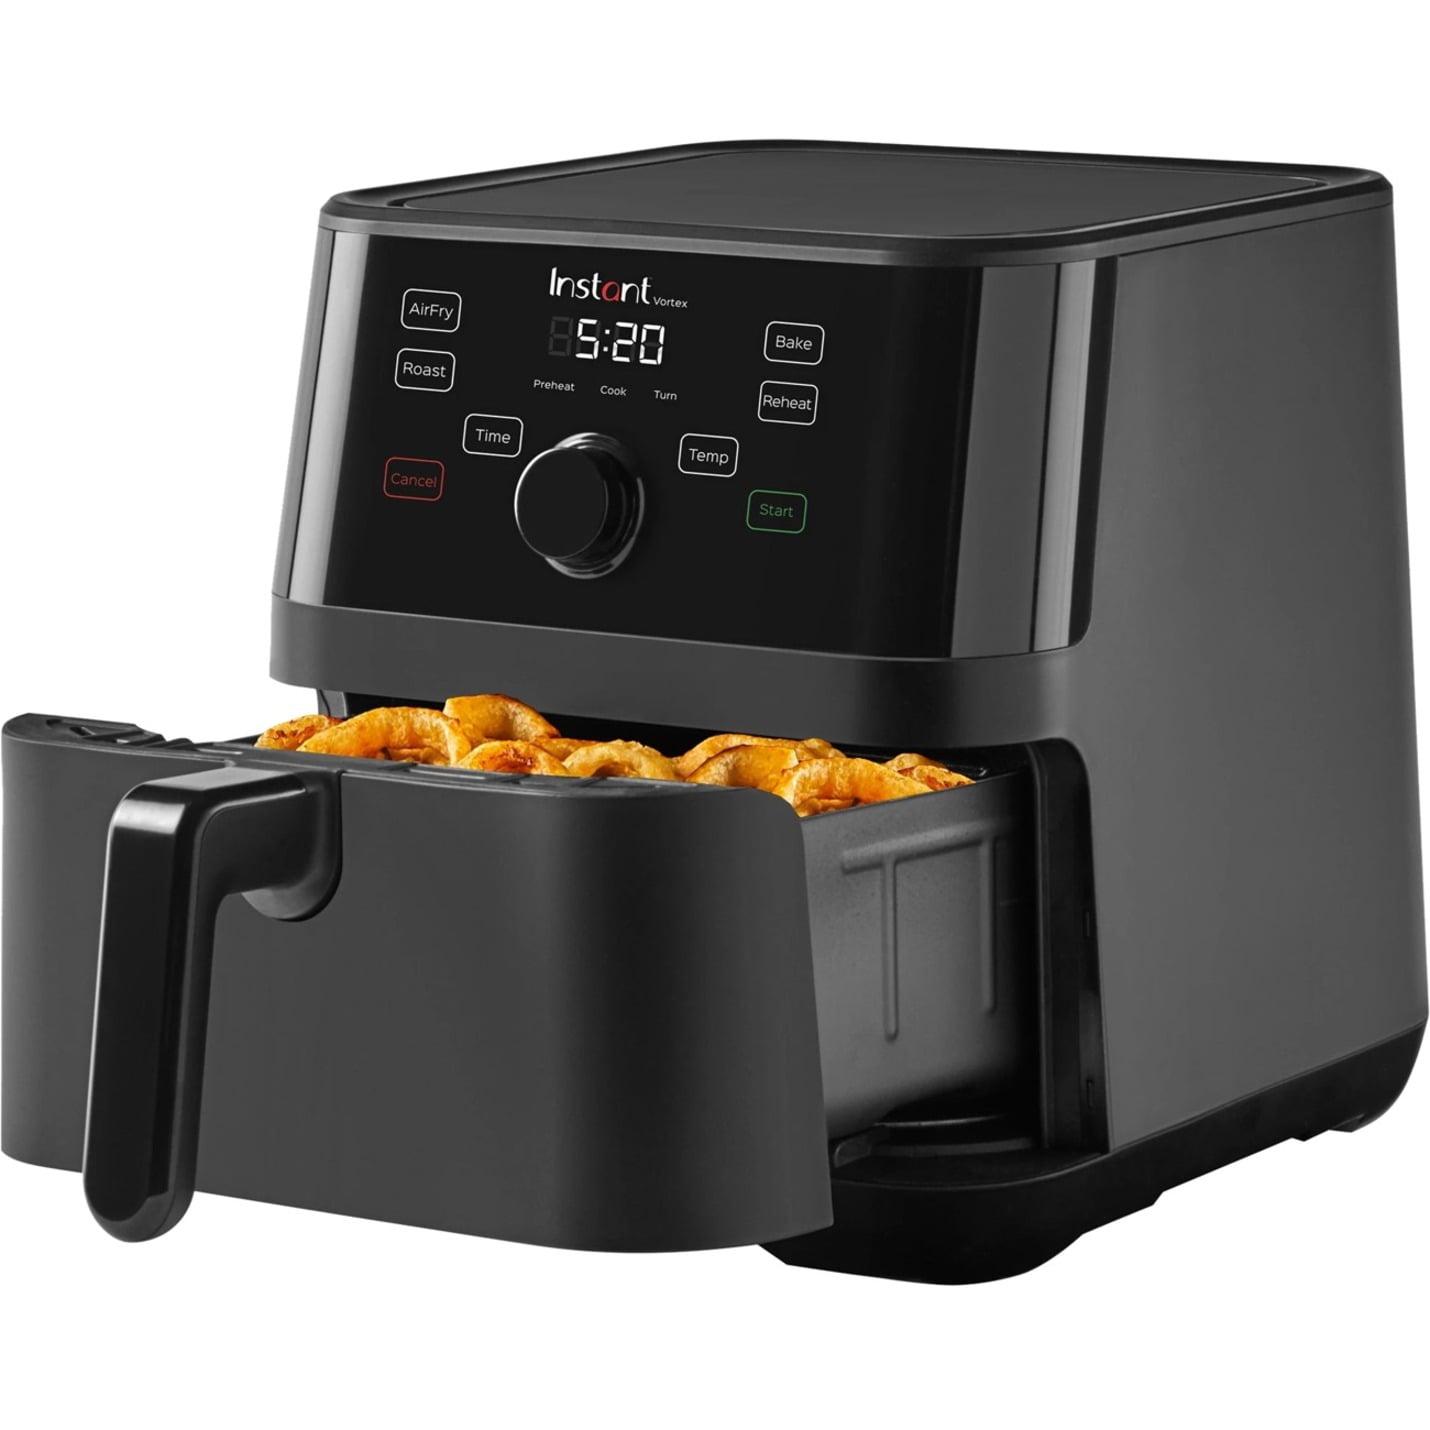 Instant Vortex 5.7-Quart Air Fryer with Customizable Smart Cooking